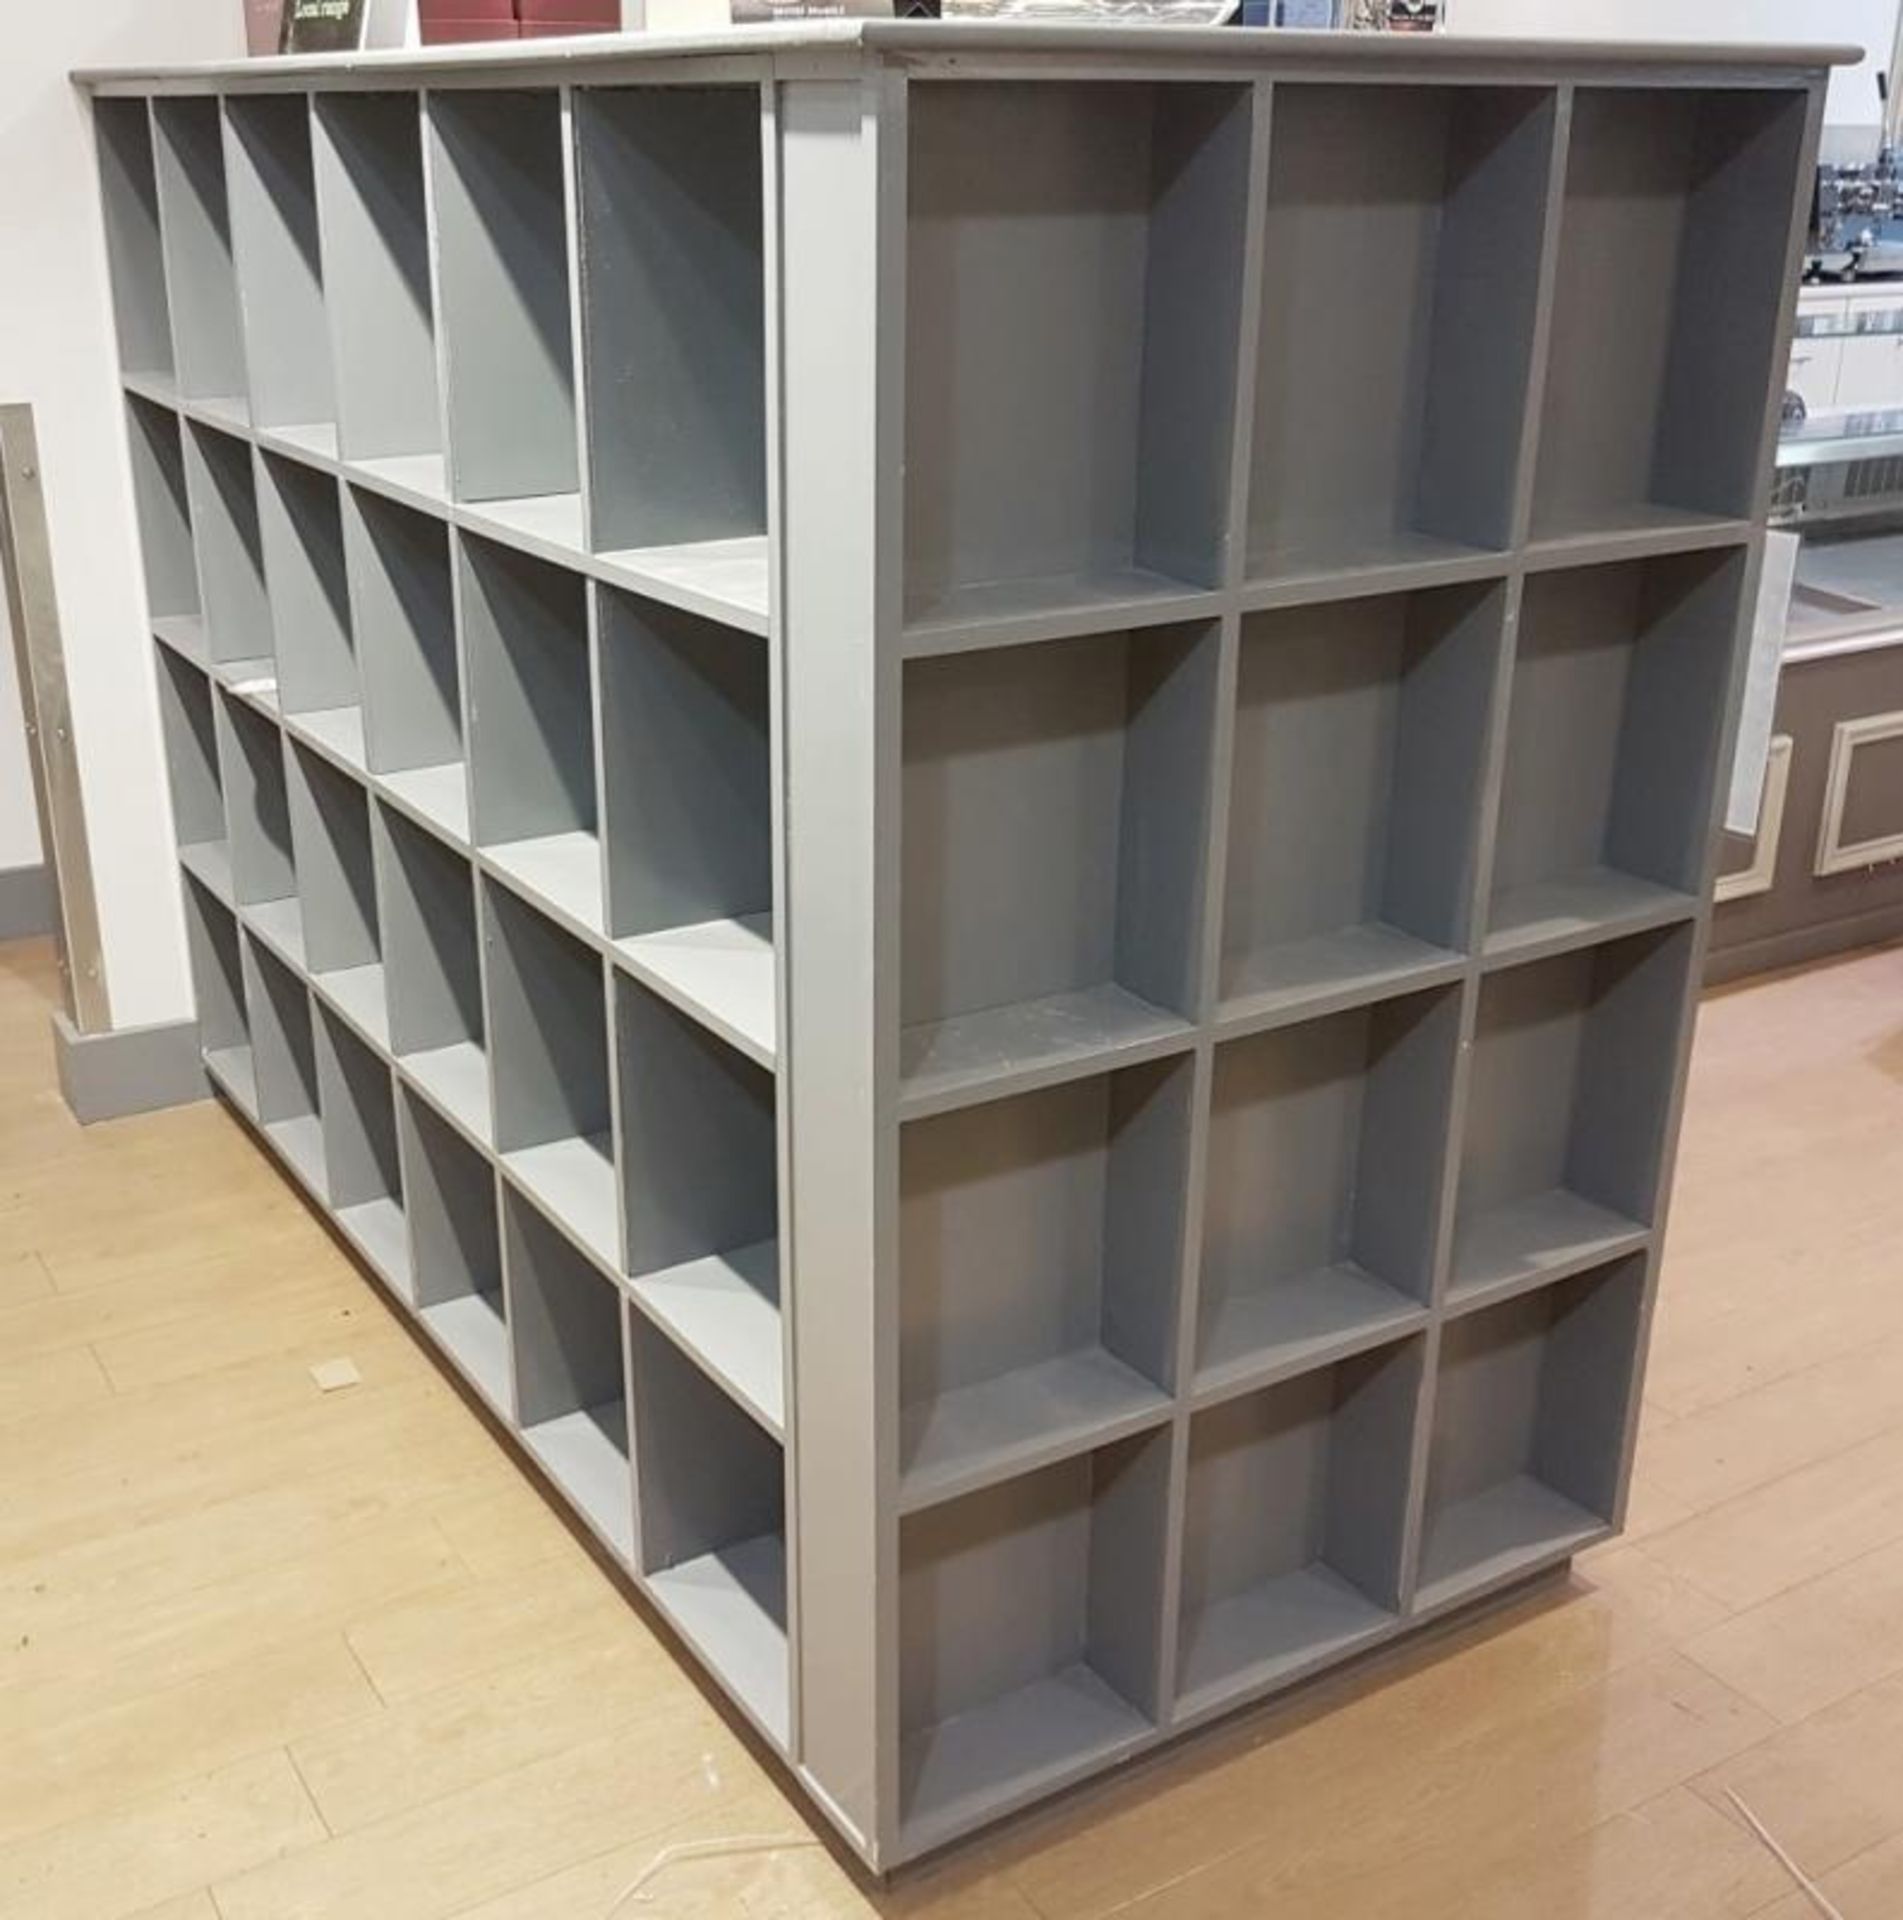 1 x Large Wooden Shelving / Wine Rack / Display Unit In Dark Grey - From A Gourmet Delicatessen - Image 2 of 5